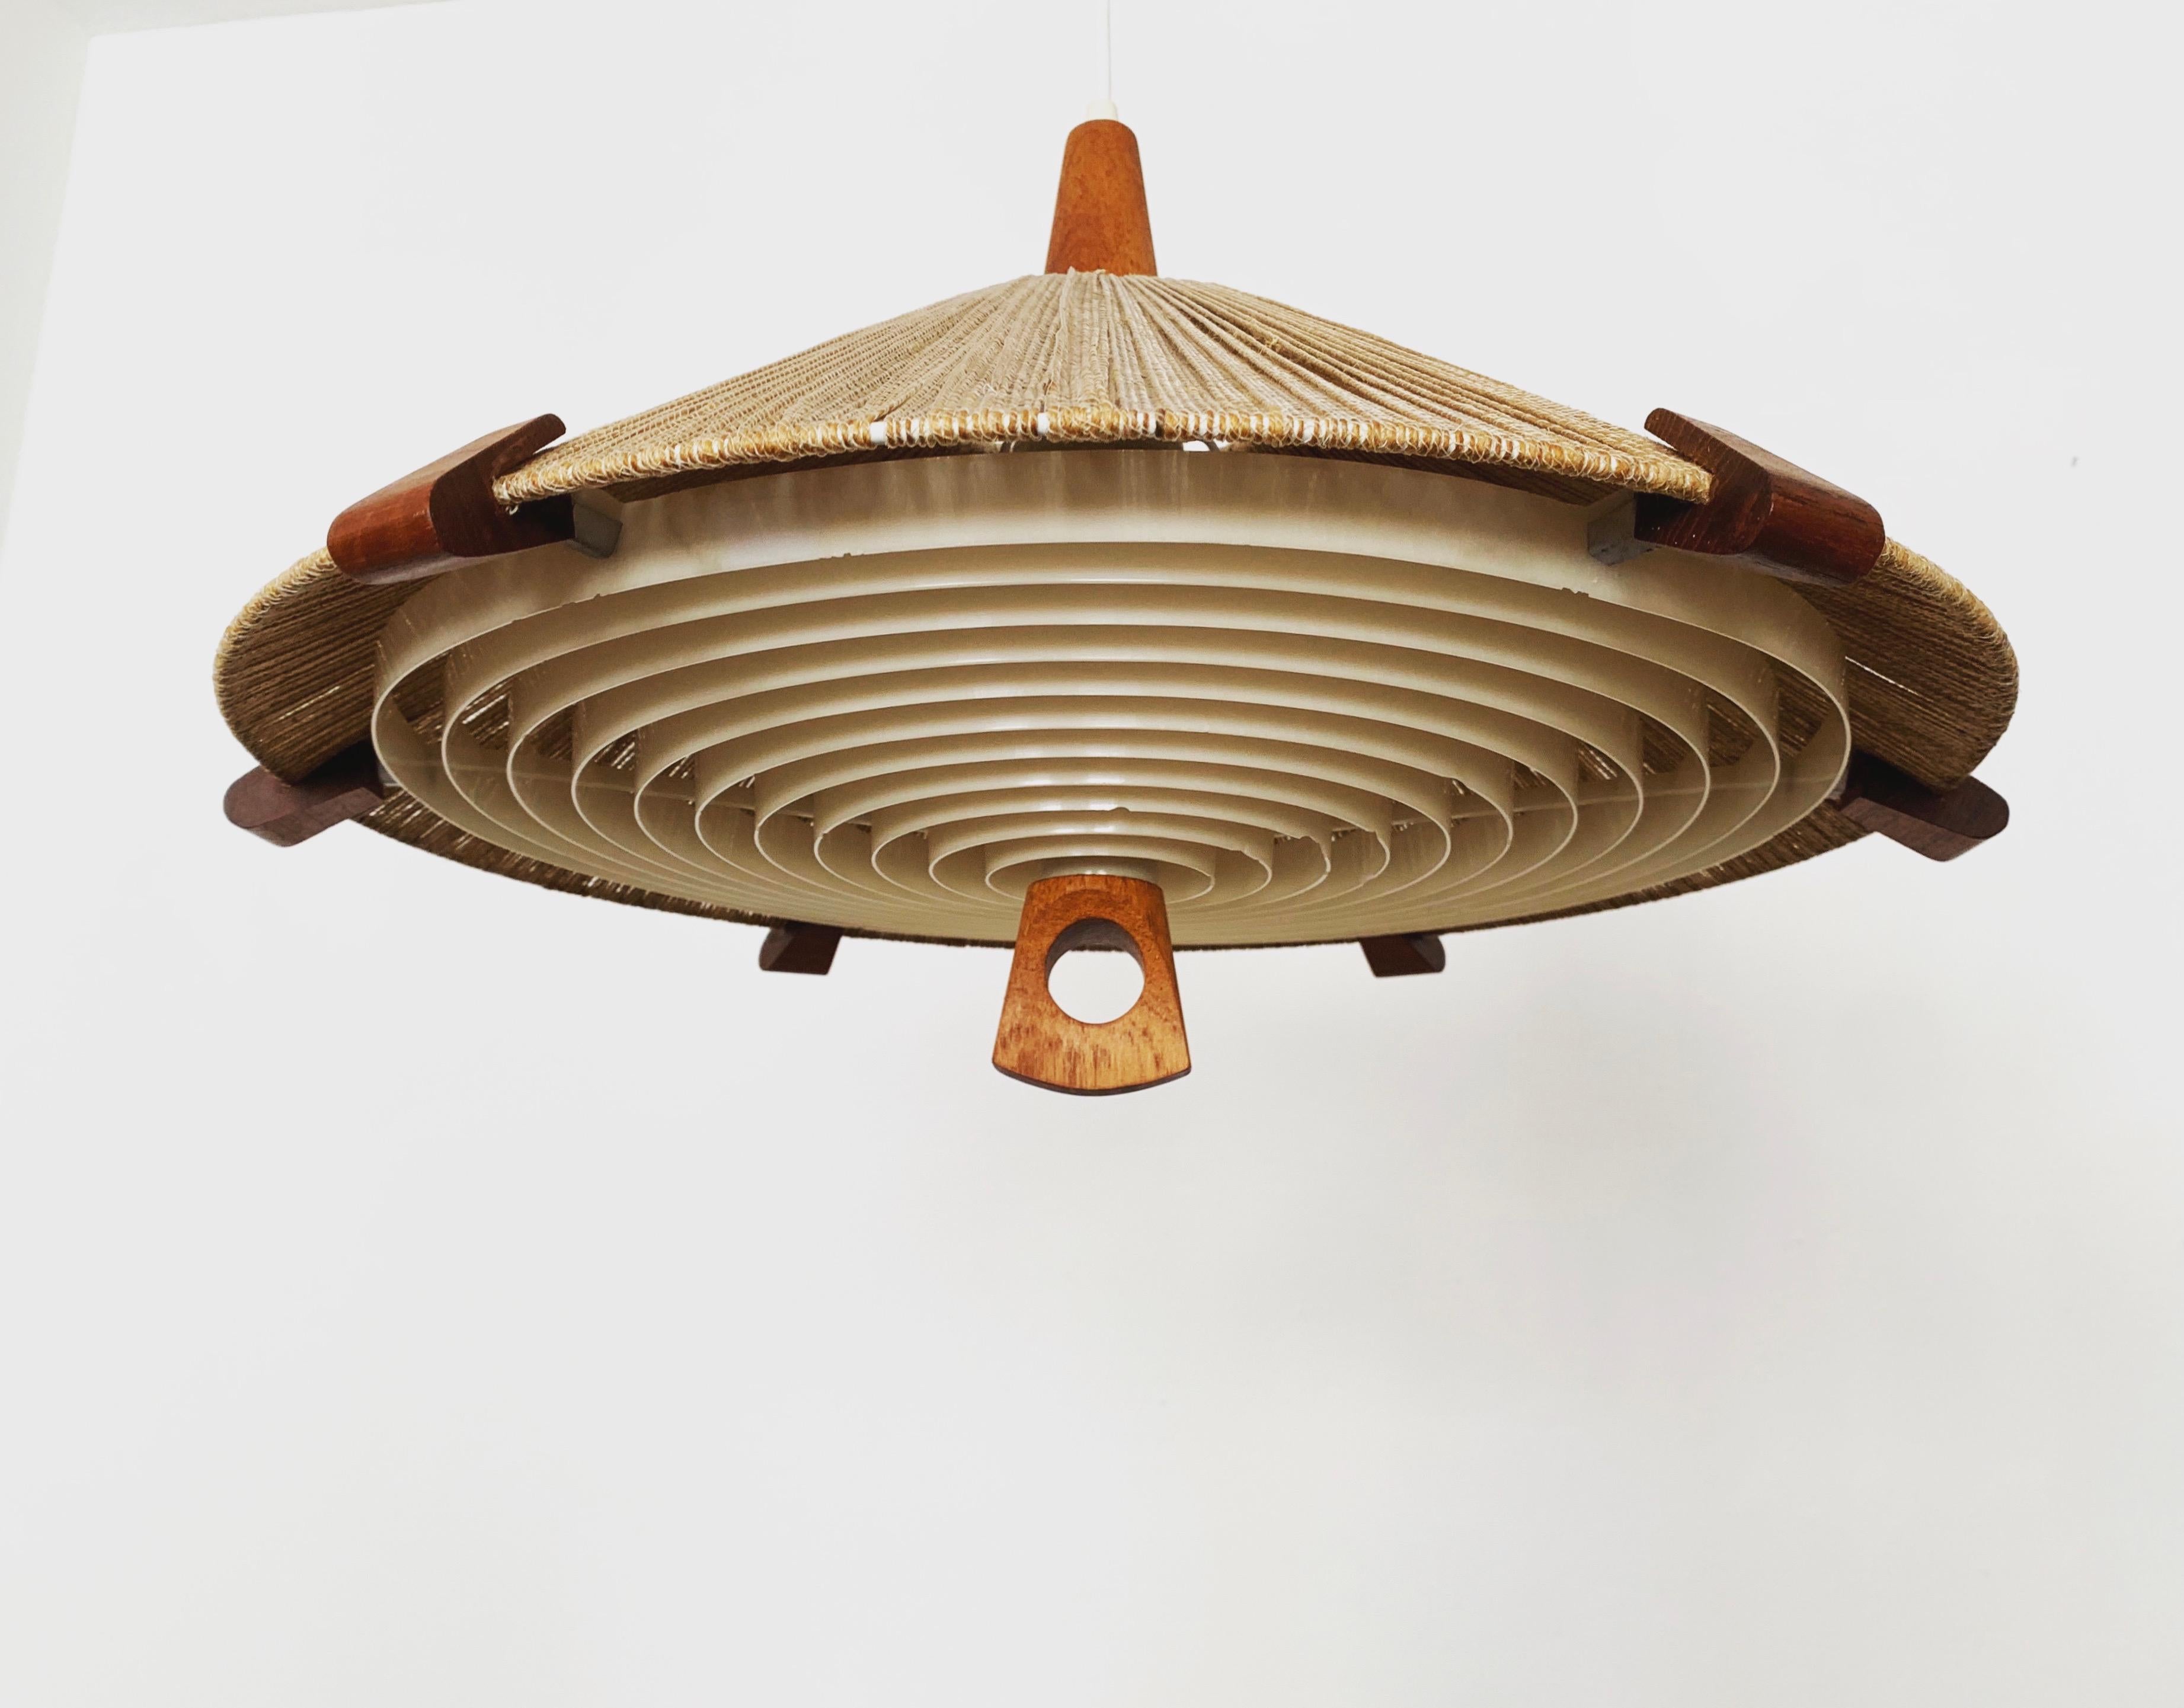 Sisal and Teak Pendant Lamp by Temde In Good Condition For Sale In München, DE